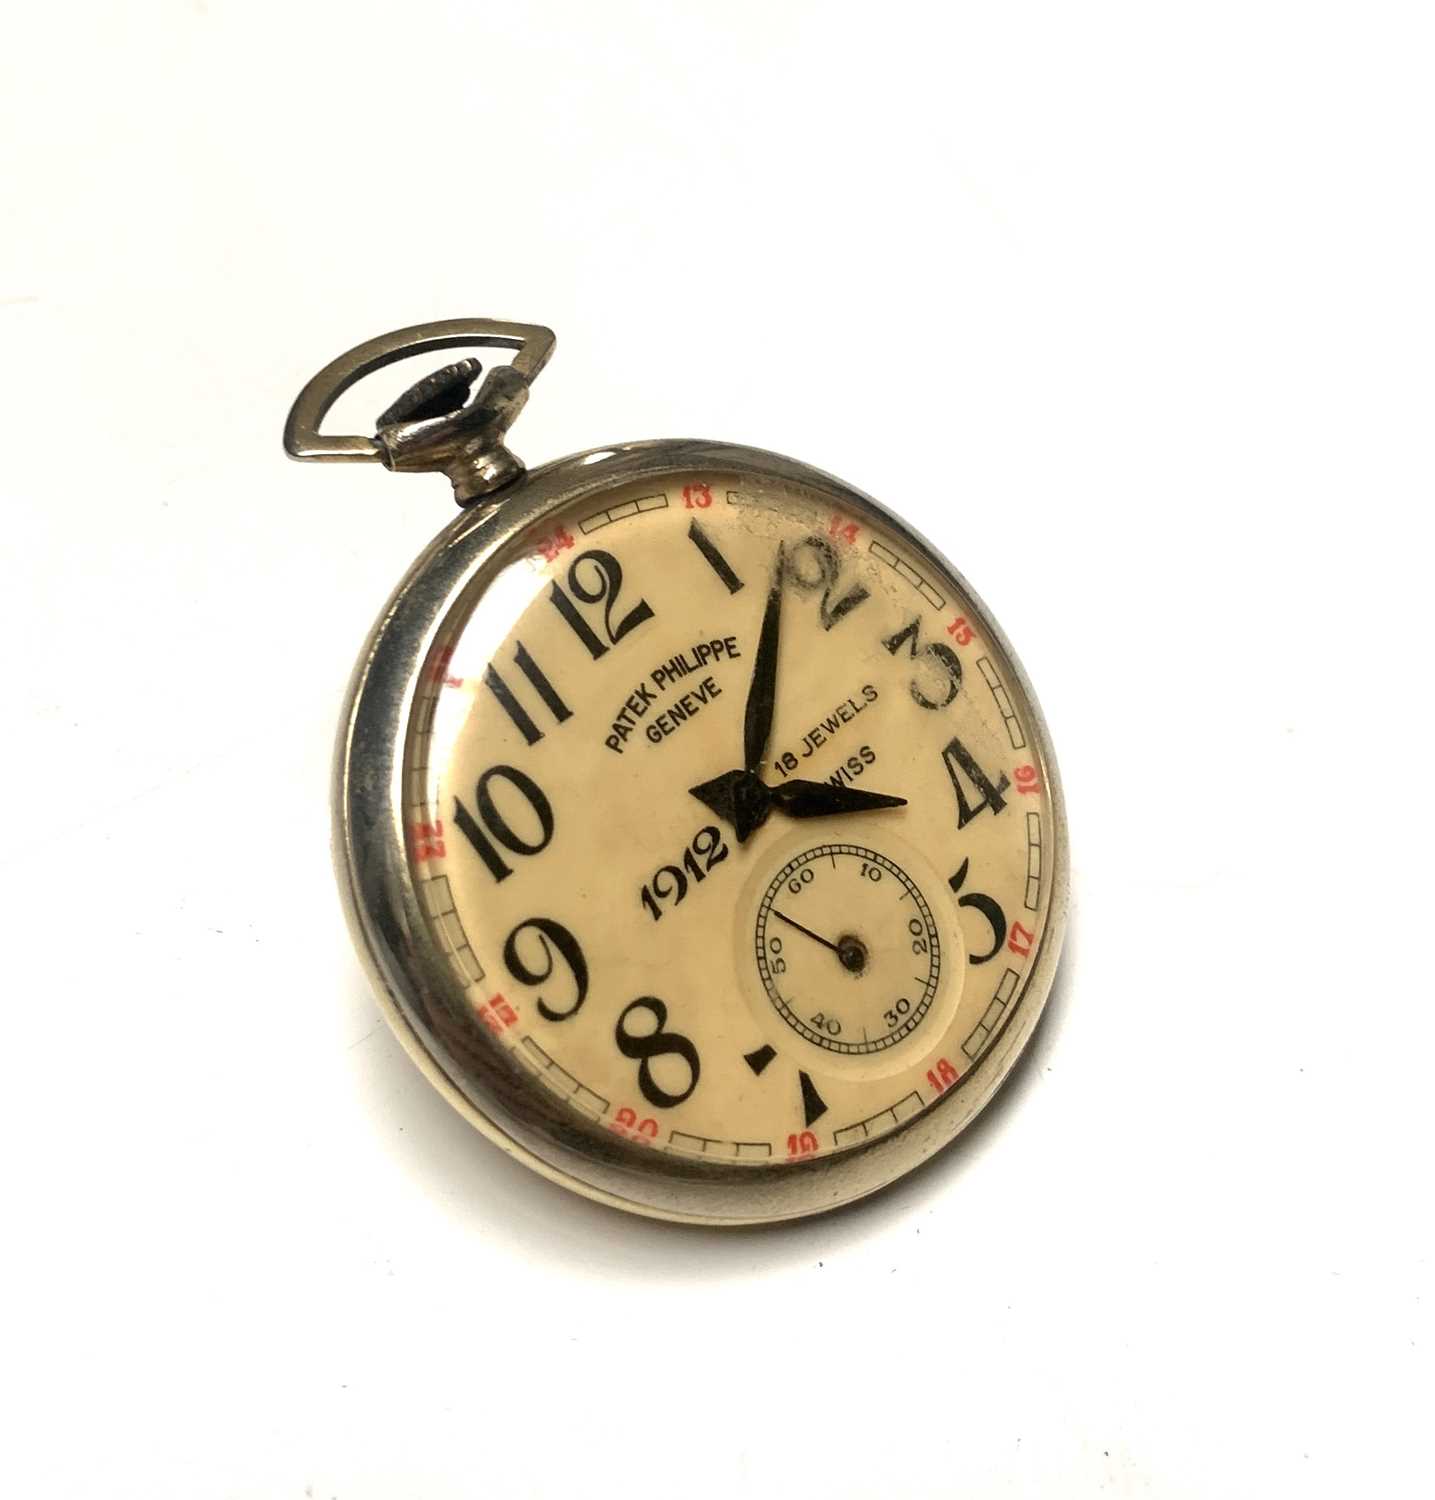 A keyless pocket watch inscribed 'Patek Philippe Geneve'.Condition report: Doesn't work